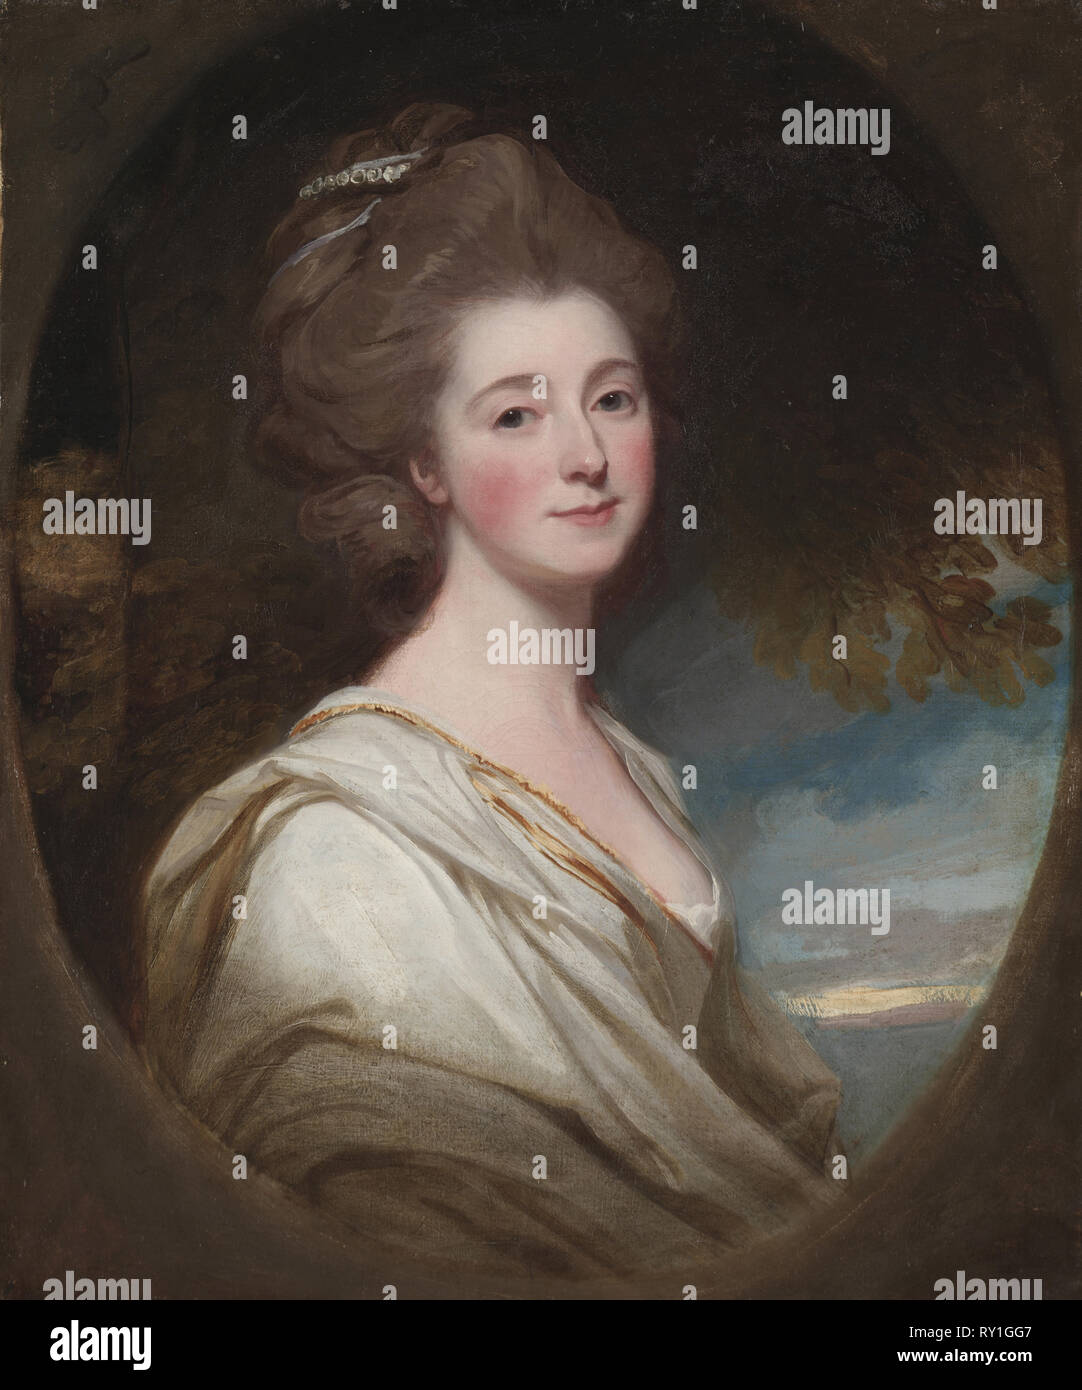 Portrait of Jane Hoskyns, c. 1778-1780. George Romney (British, 1734-1802). Oil on canvas; framed: 102 x 89 x 10.5 cm (40 3/16 x 35 1/16 x 4 1/8 in.); unframed: 69.8 x 59 cm (27 1/2 x 23 1/4 in Stock Photo